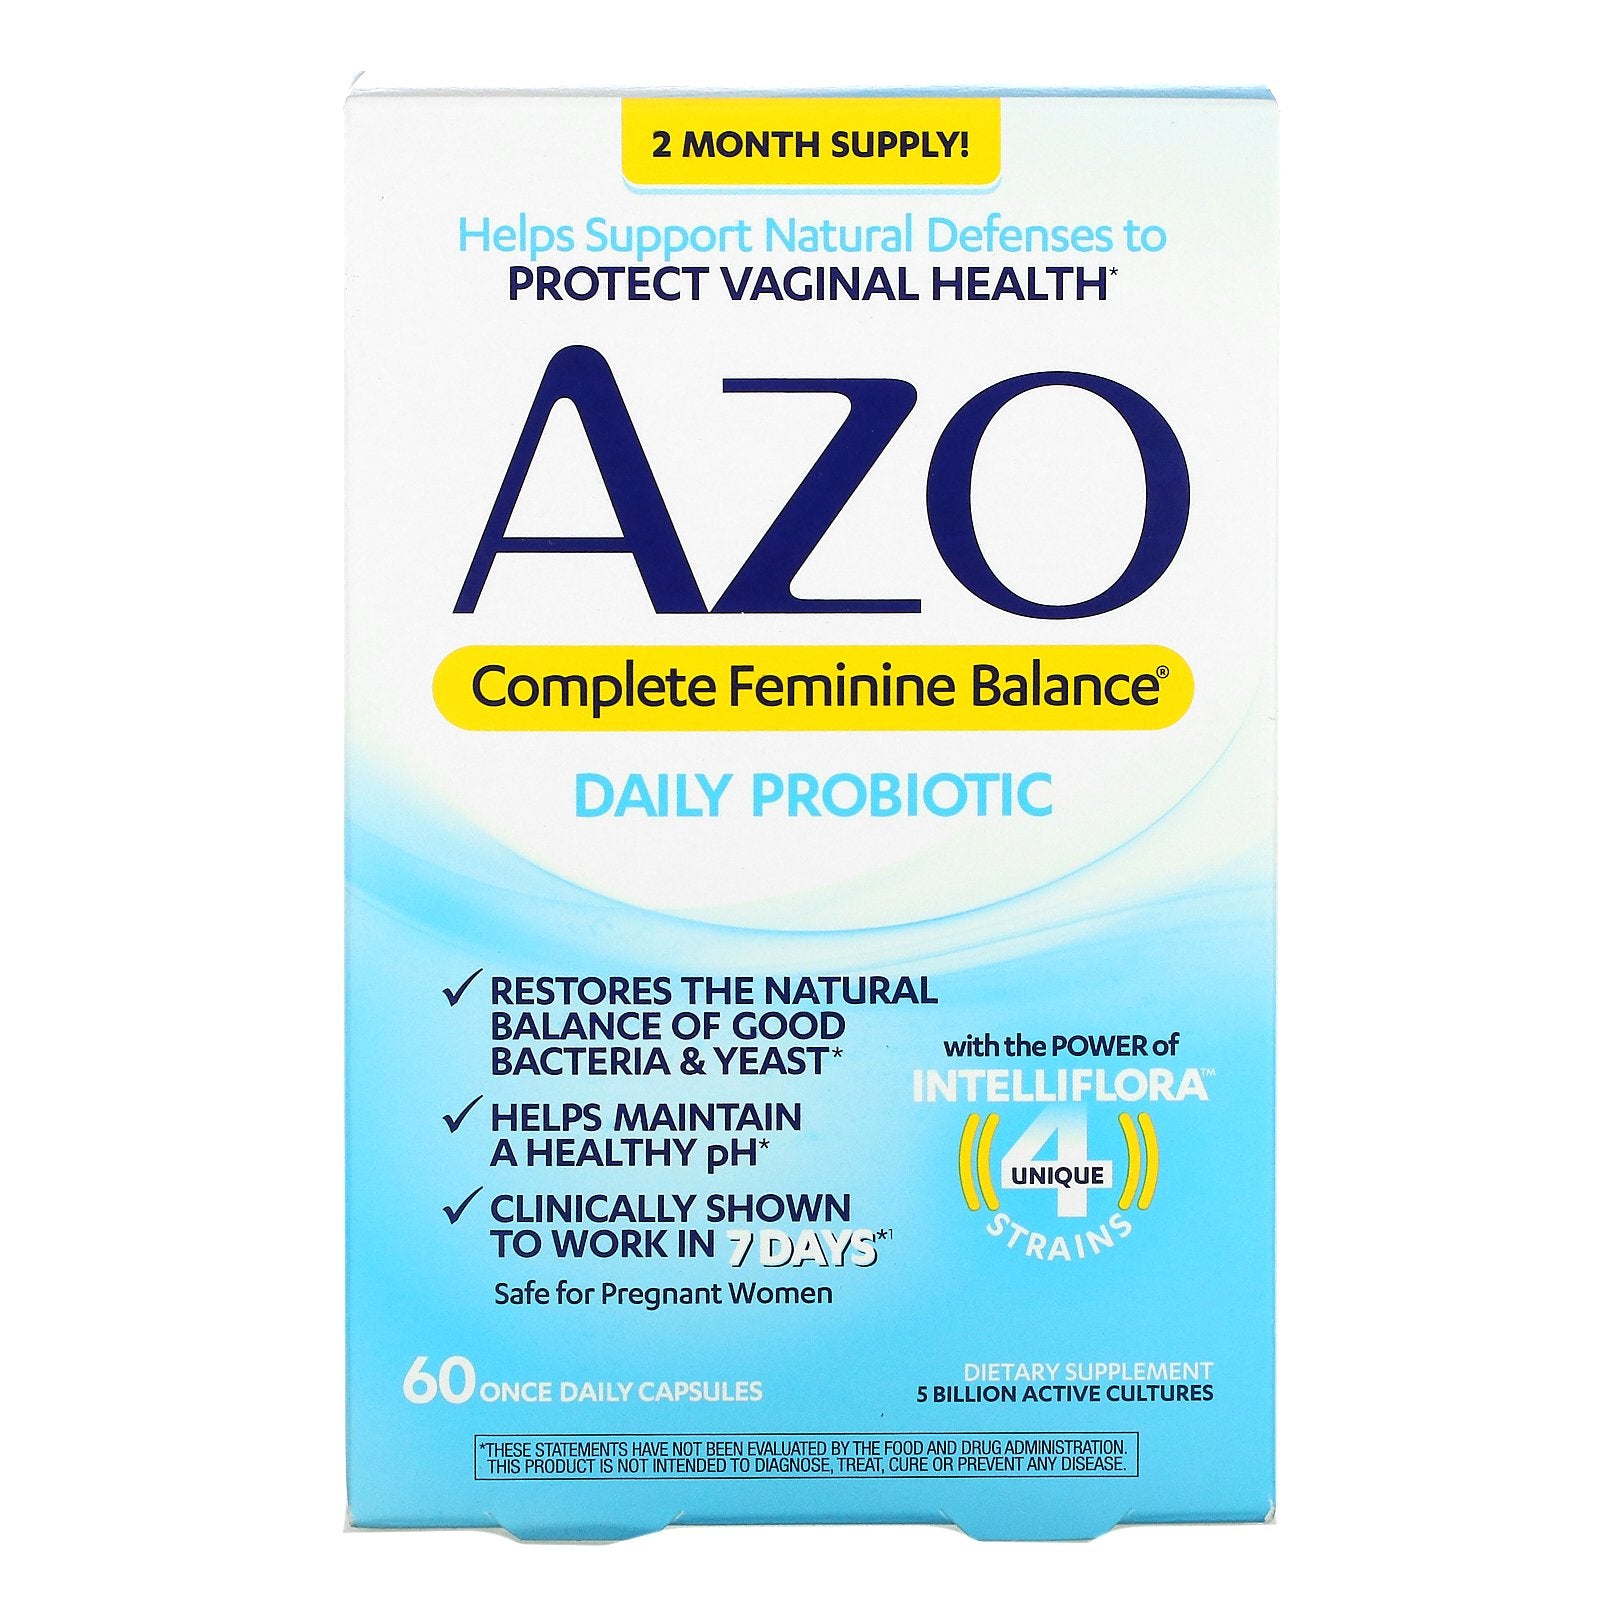 Azo, Complete Feminine Balance, Daily Probiotic, 5 Billion Active Cultures, 60 Once Daily Capsules